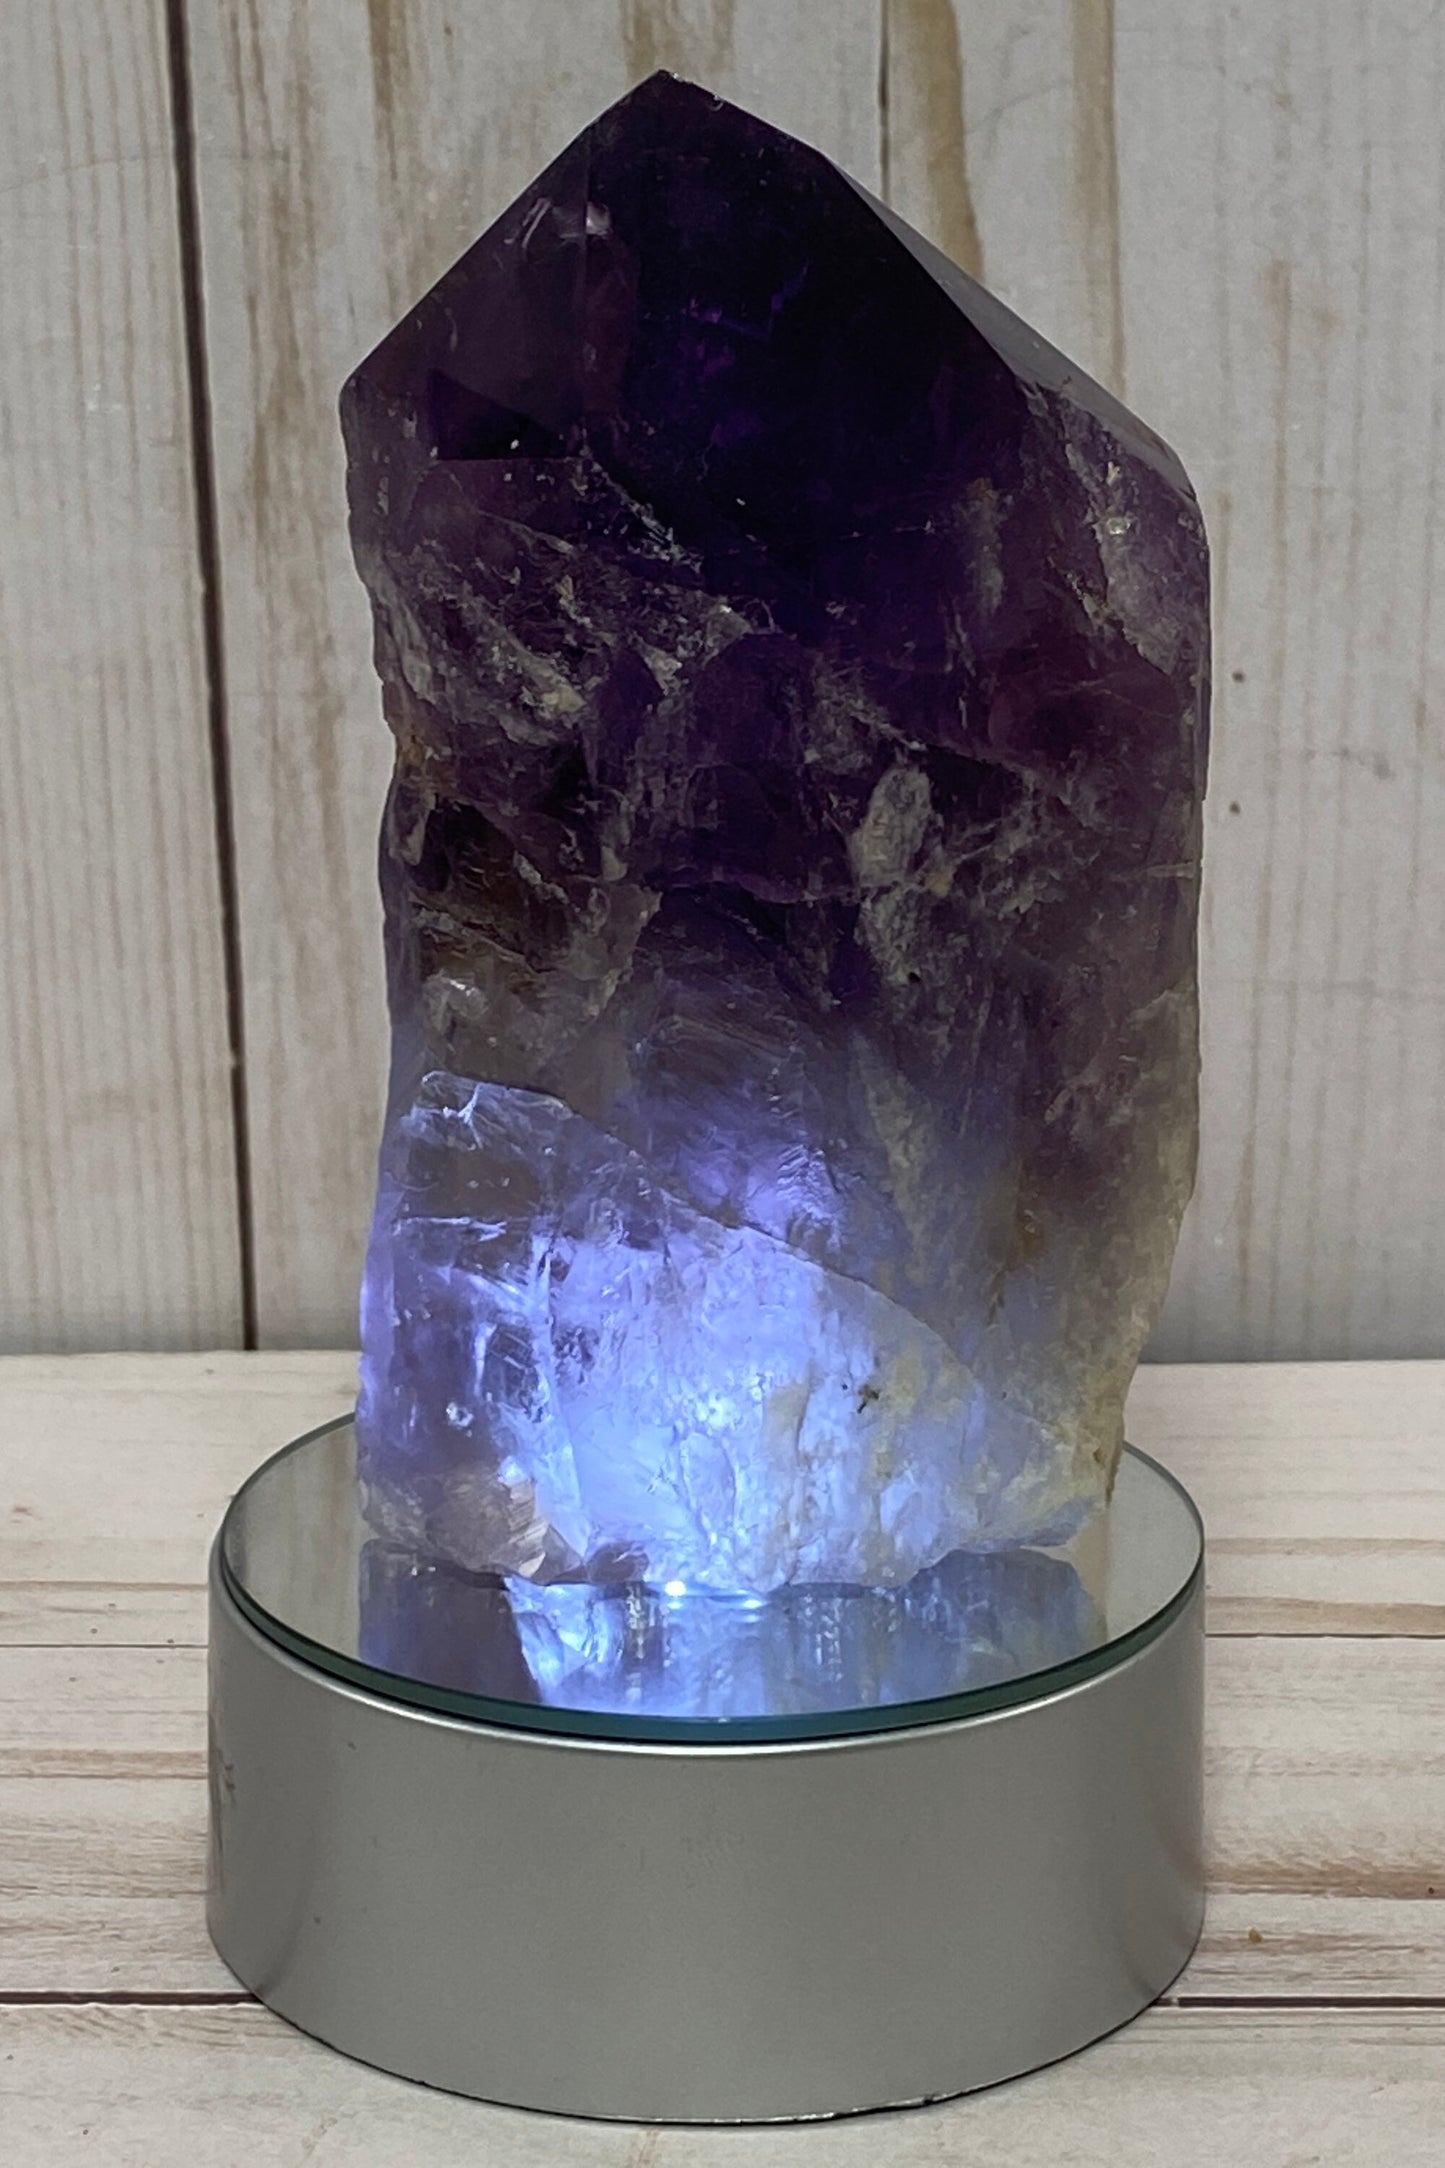 Amethyst root, dragon's tooth w/cut base and light stand